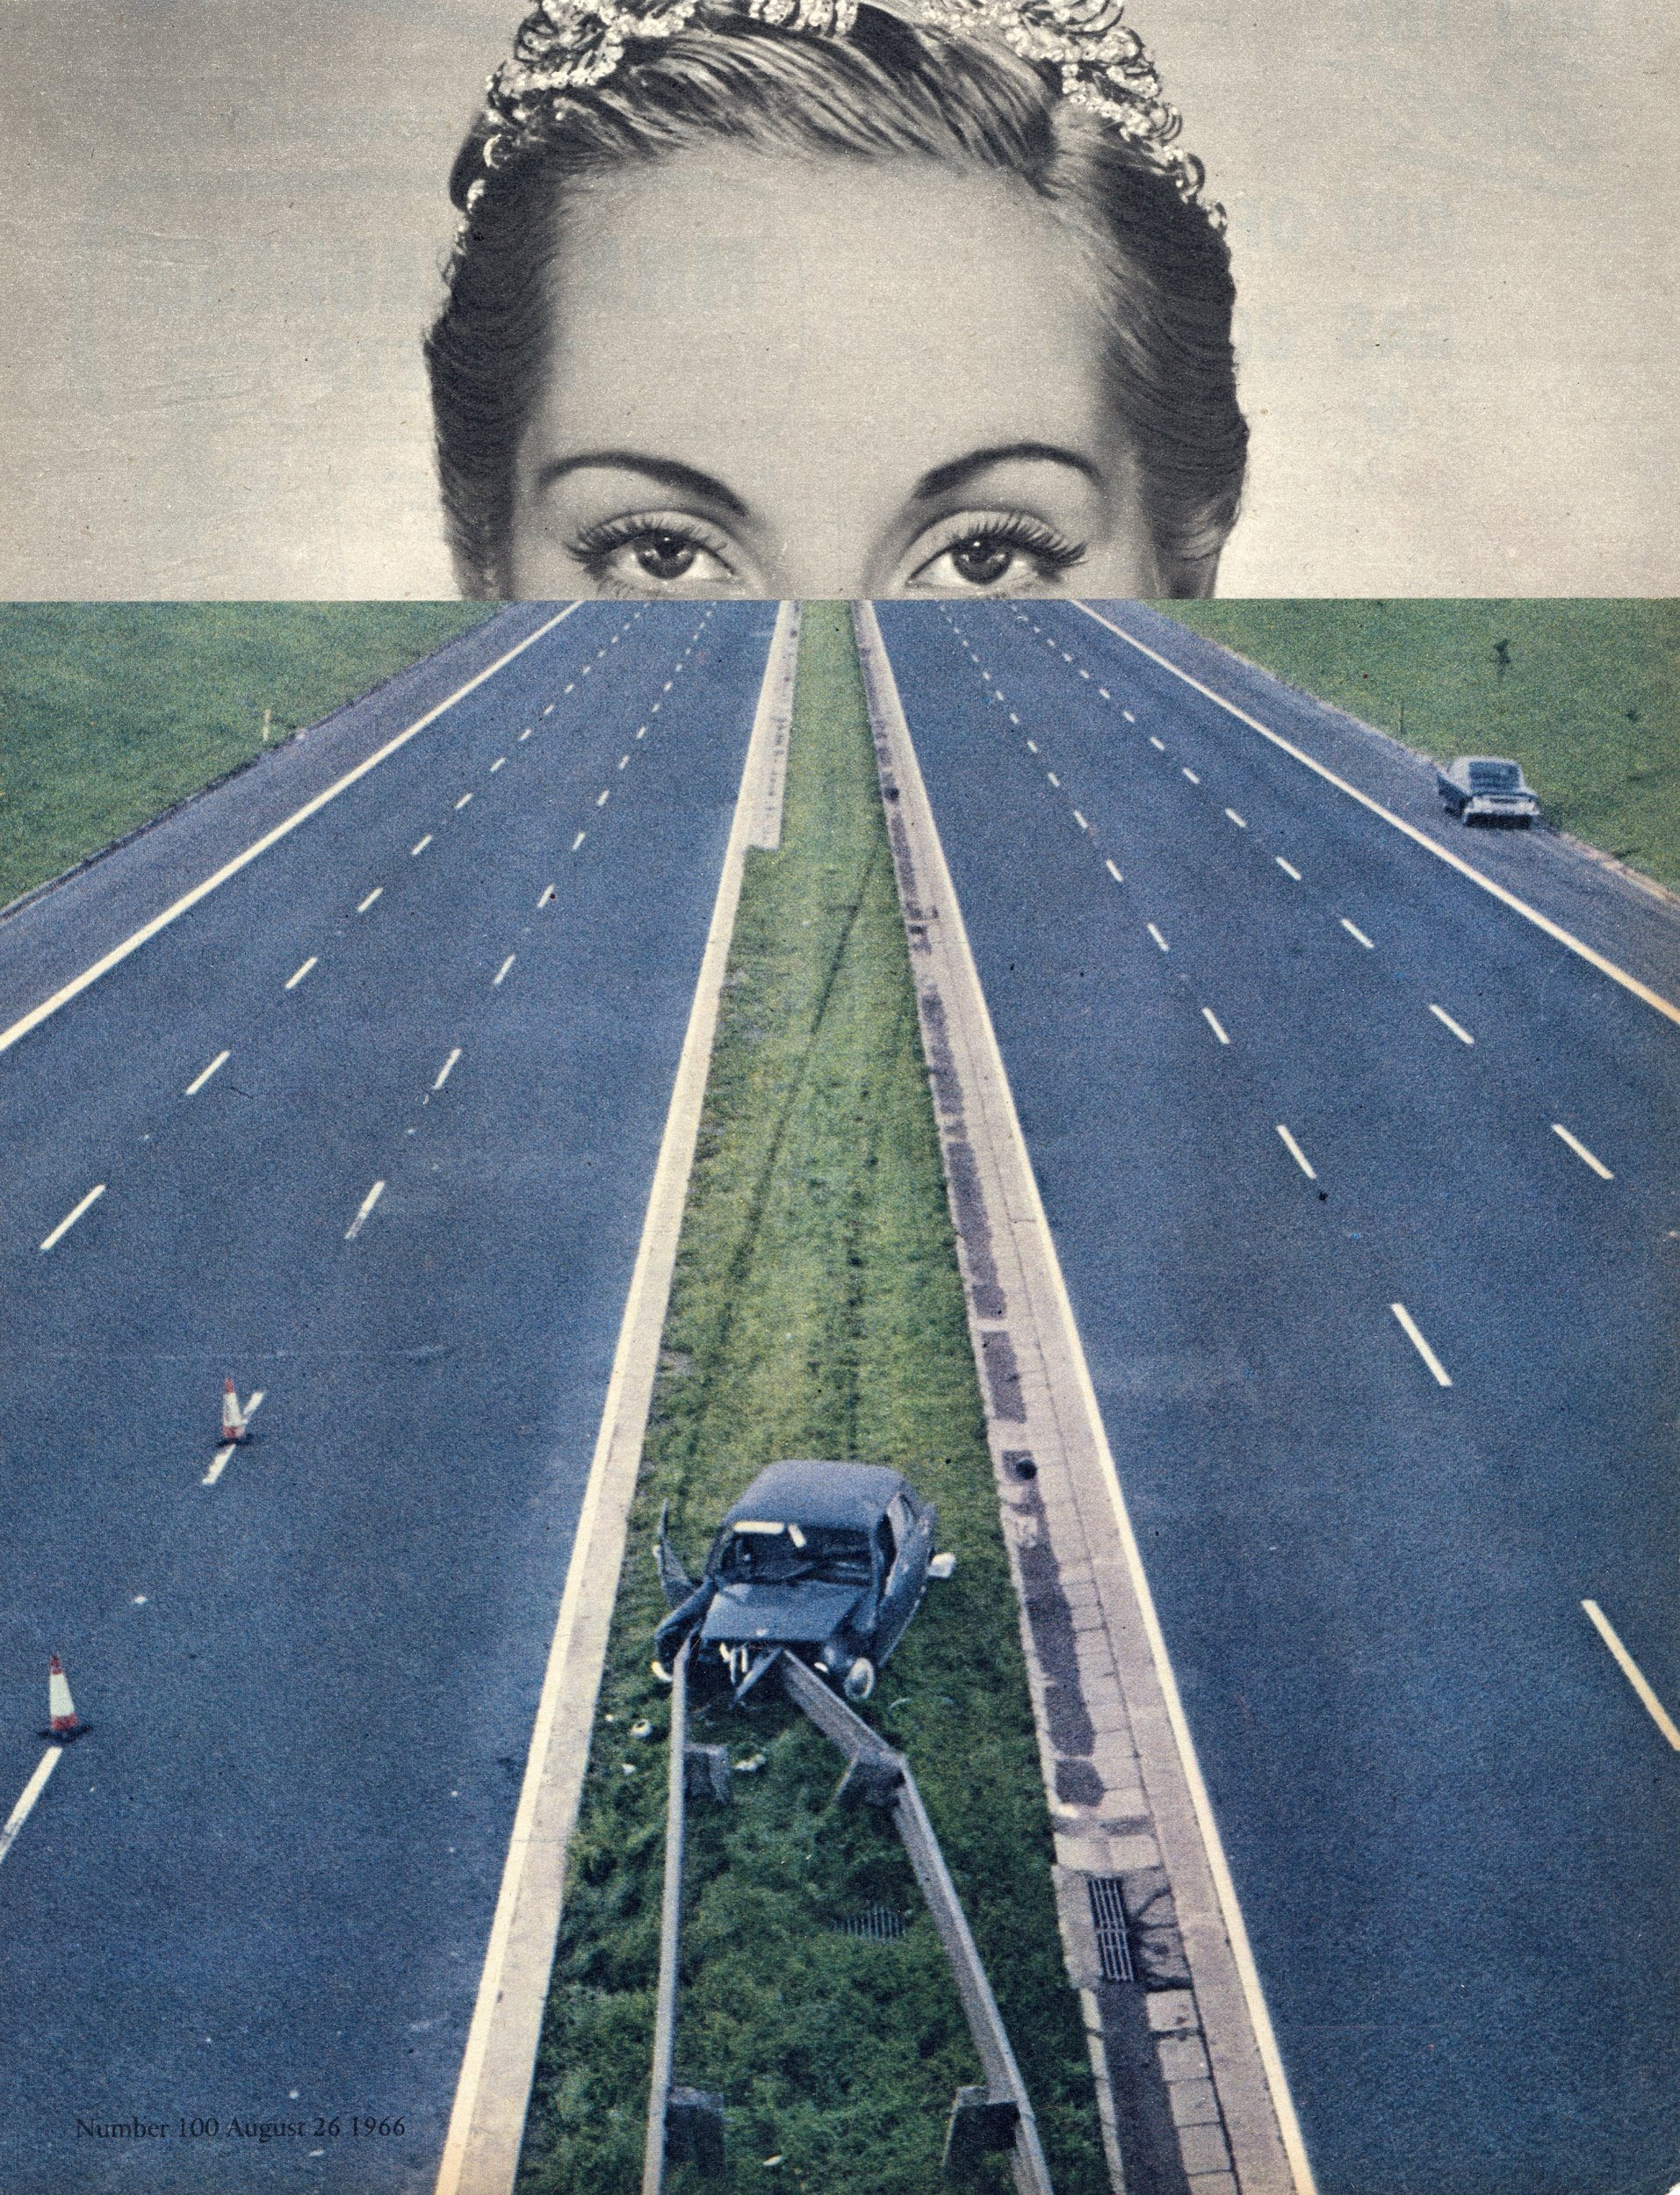 A collage photograph showing half a woman's face looking down an empty motorway strewn with damaged cars